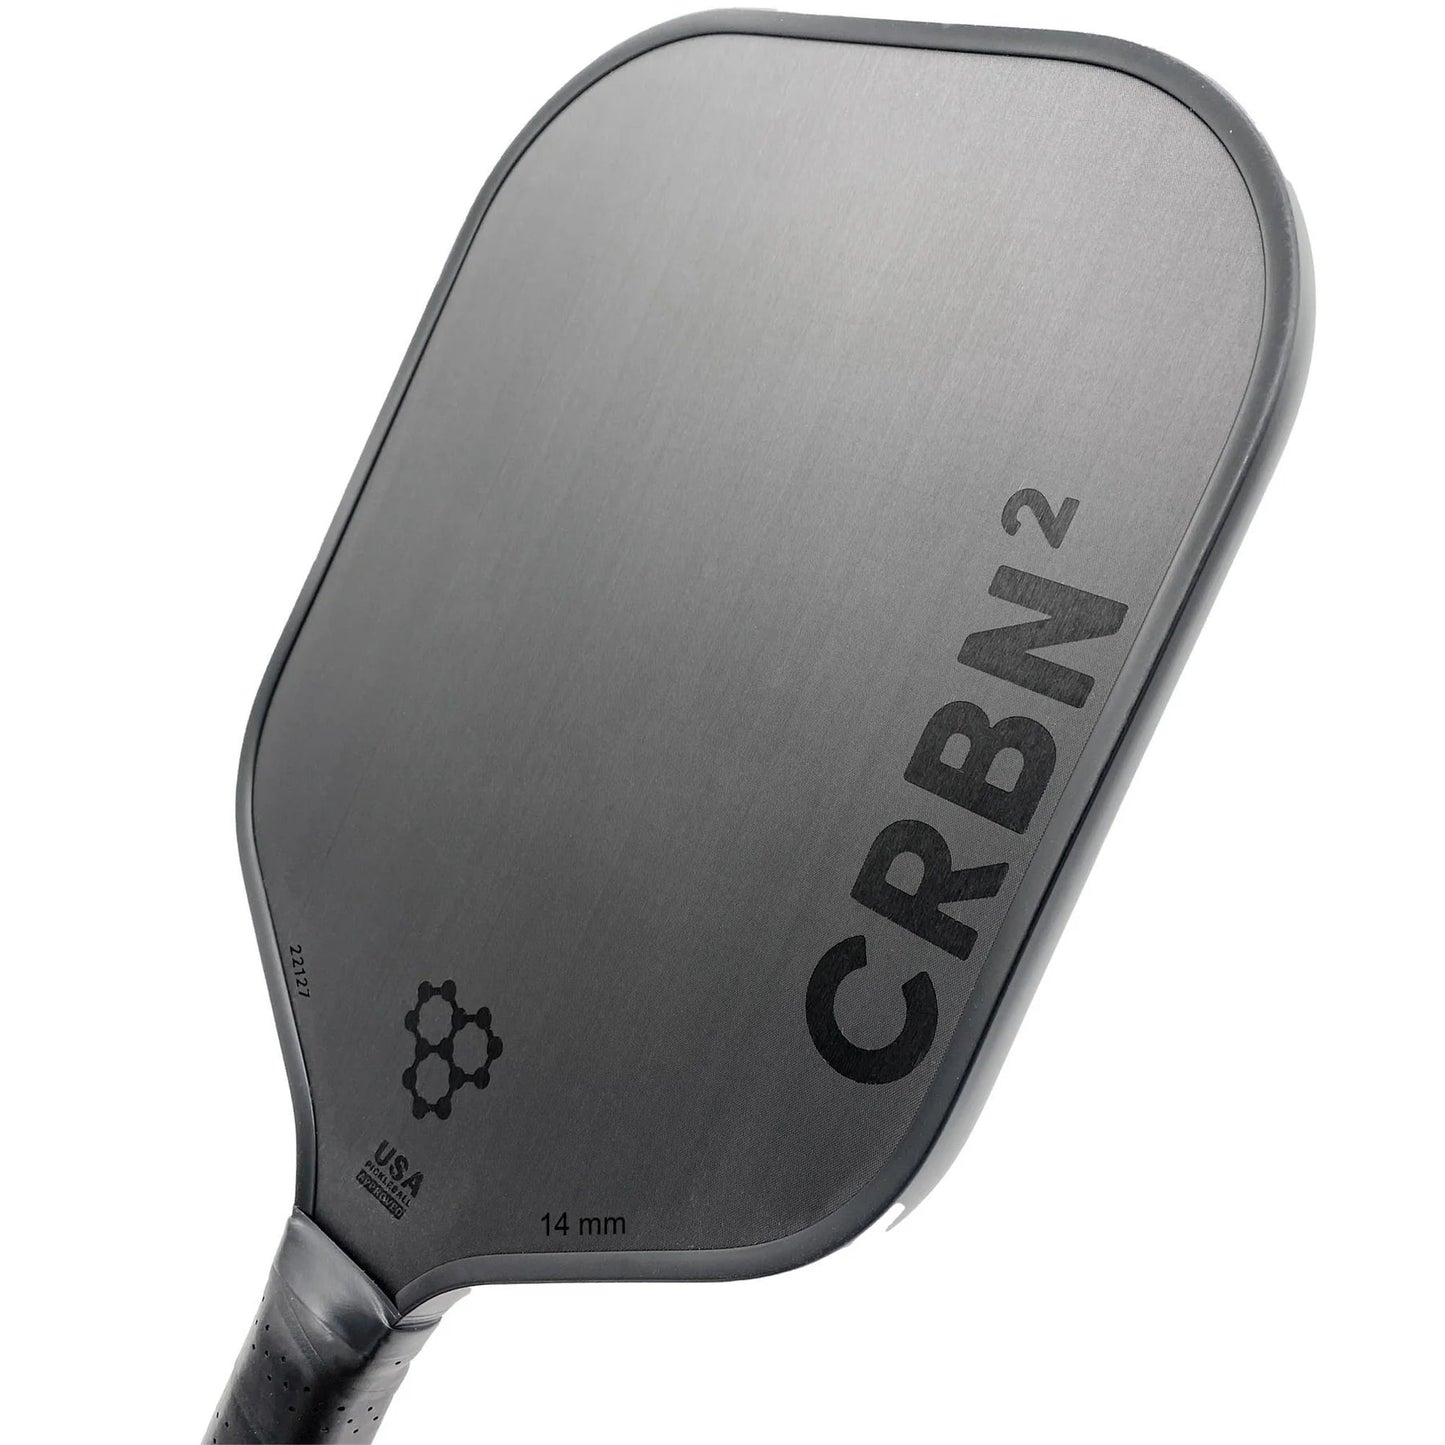 A CRBN 2 - 14mm Pickleball Paddle with the word crbn on it.